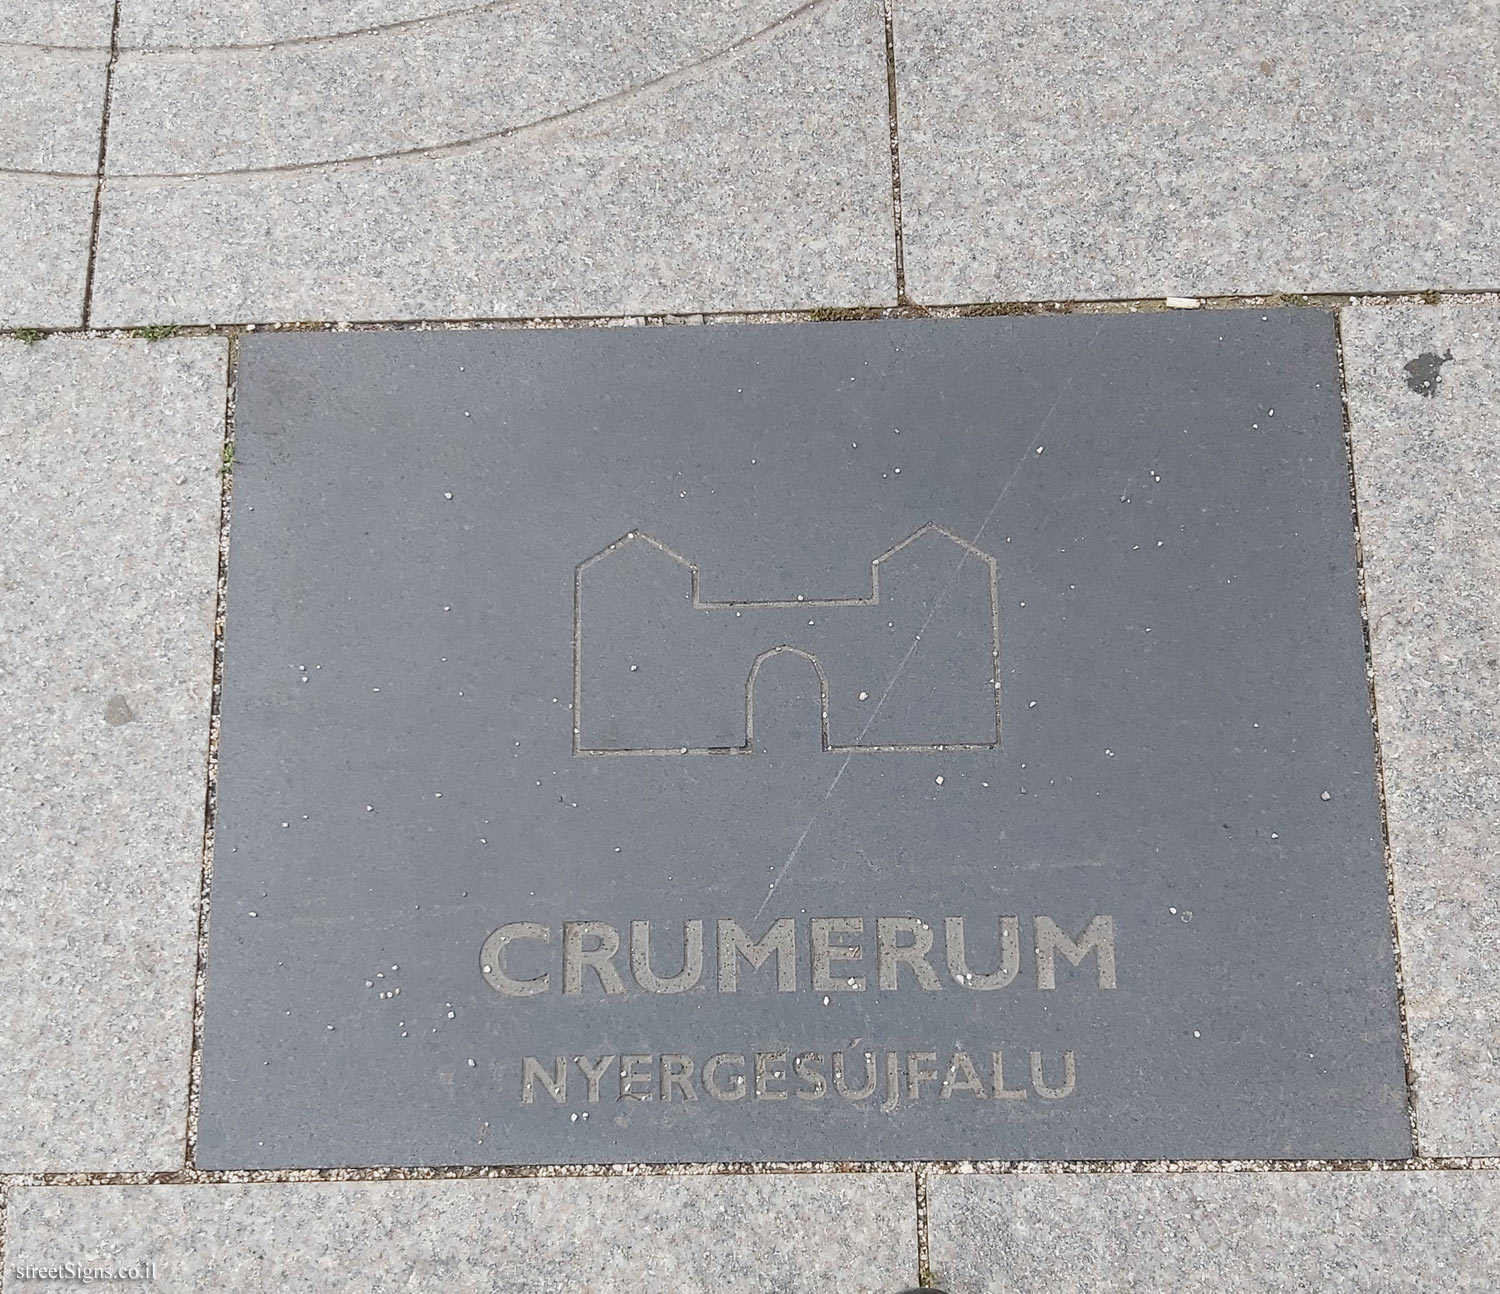 Budapest - the Roman frontier - Pannonian Limes - Crumerum